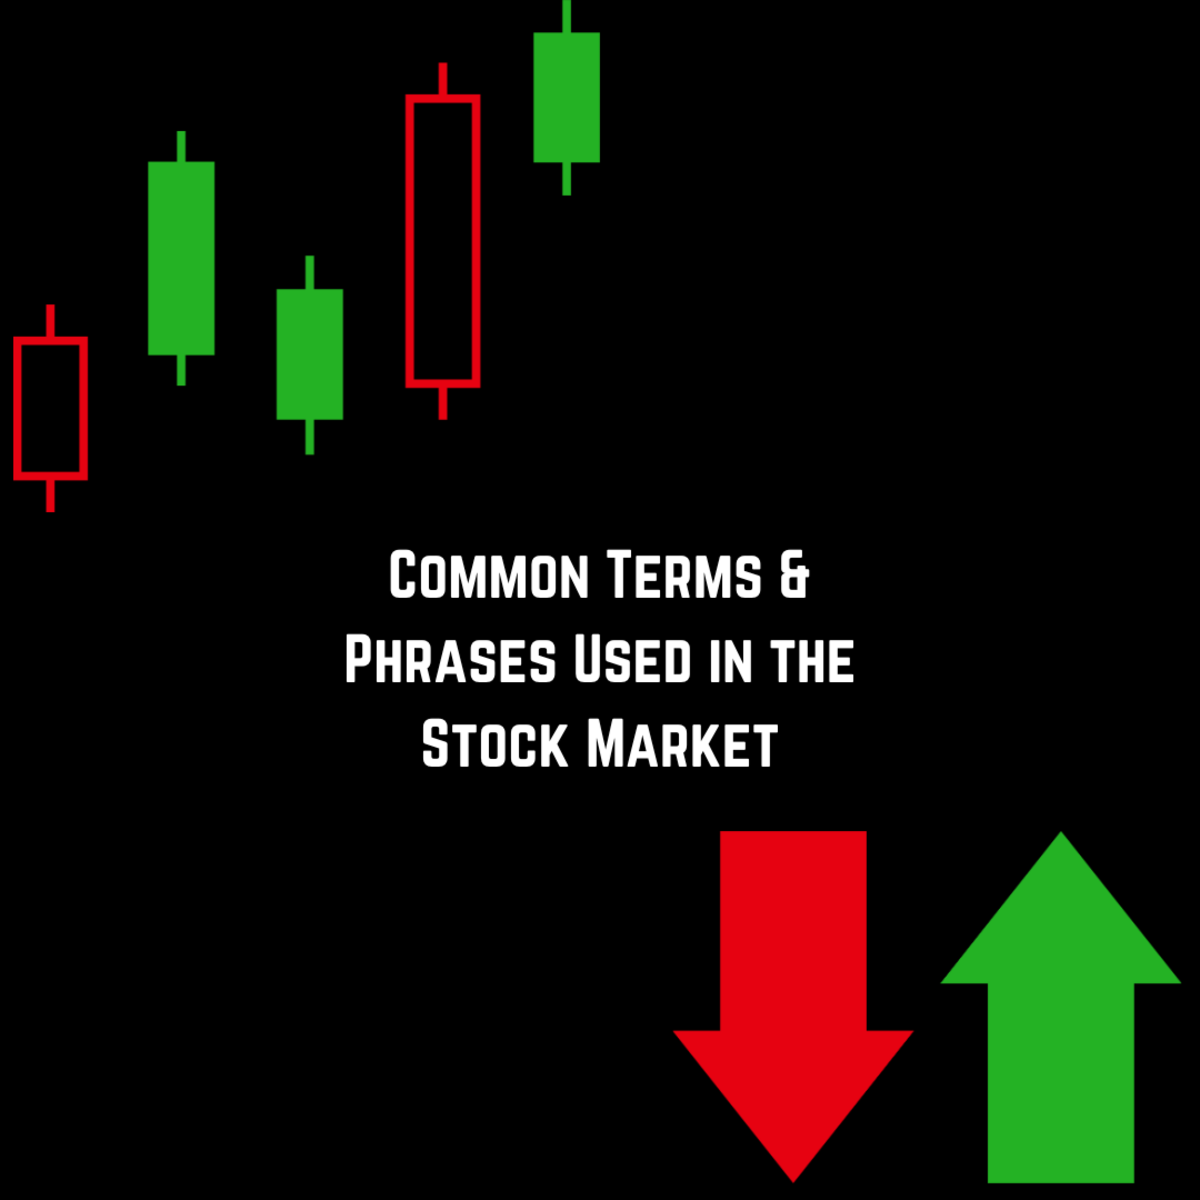 Common Terms & Phrases Used in the Stock Market